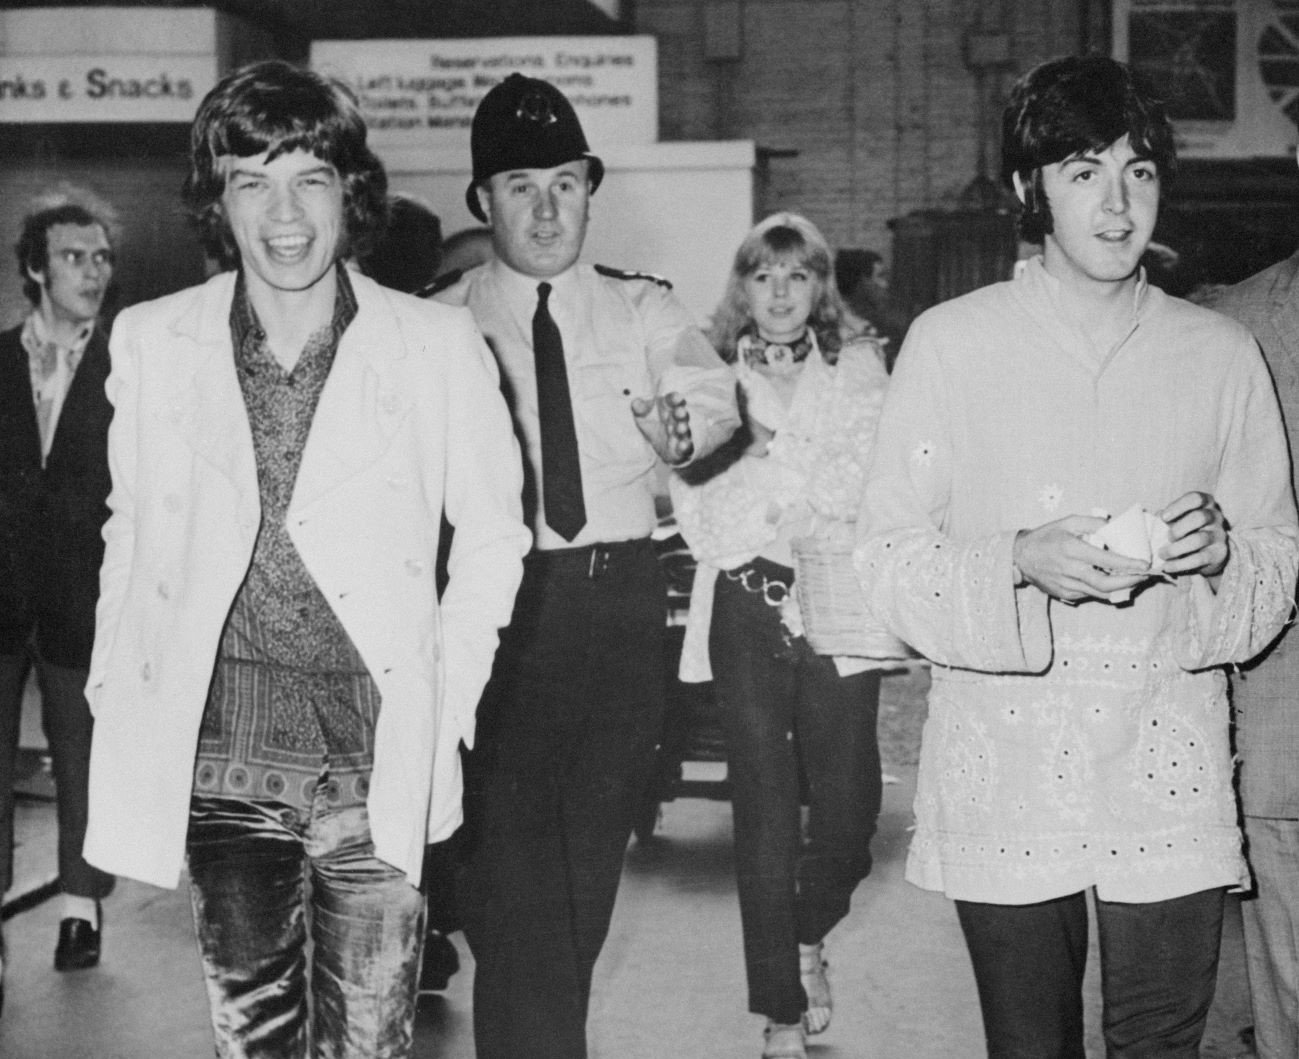 A black and white picture of Mick Jagger of The Rolling Stones and Paul McCartney of The Beatles walking together.